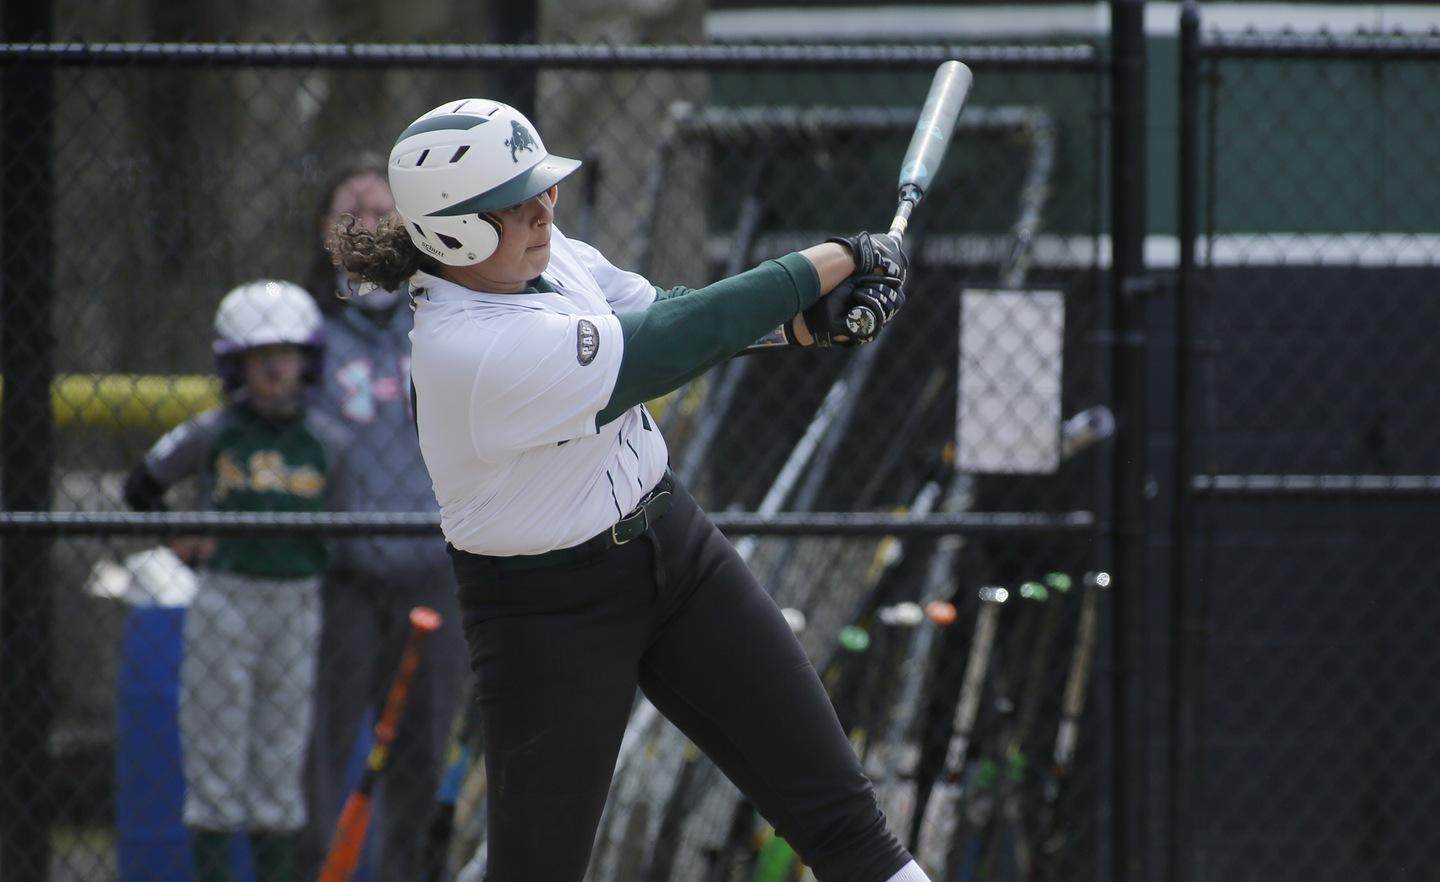 Bethany dealt two-game sweep by PSU Behrend